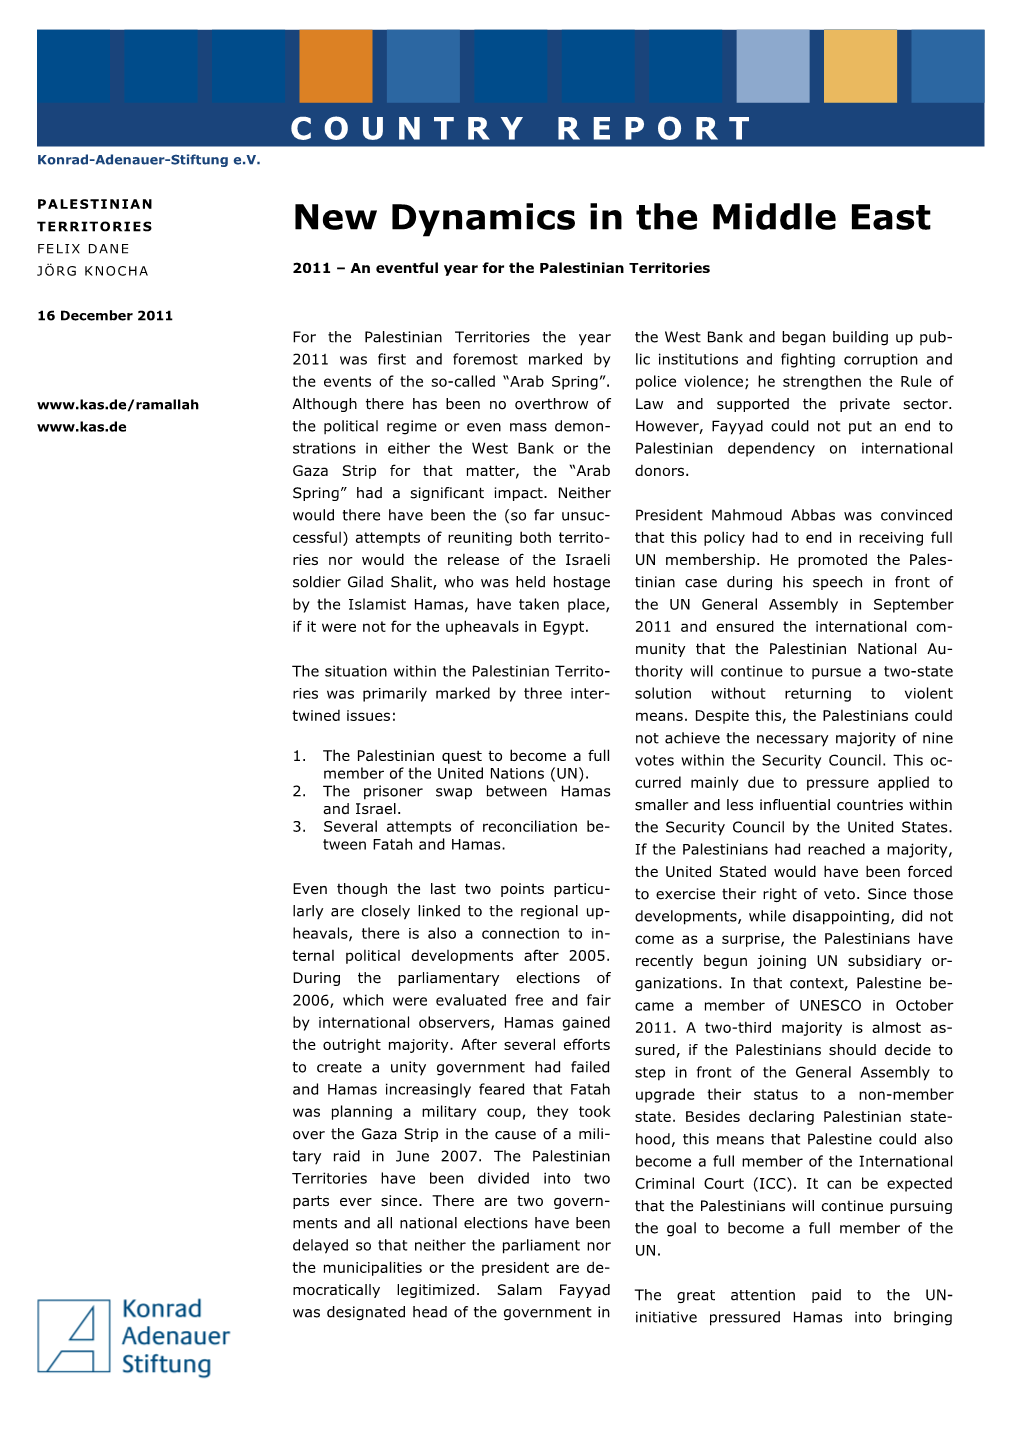 New Dynamics in the Middle East 1